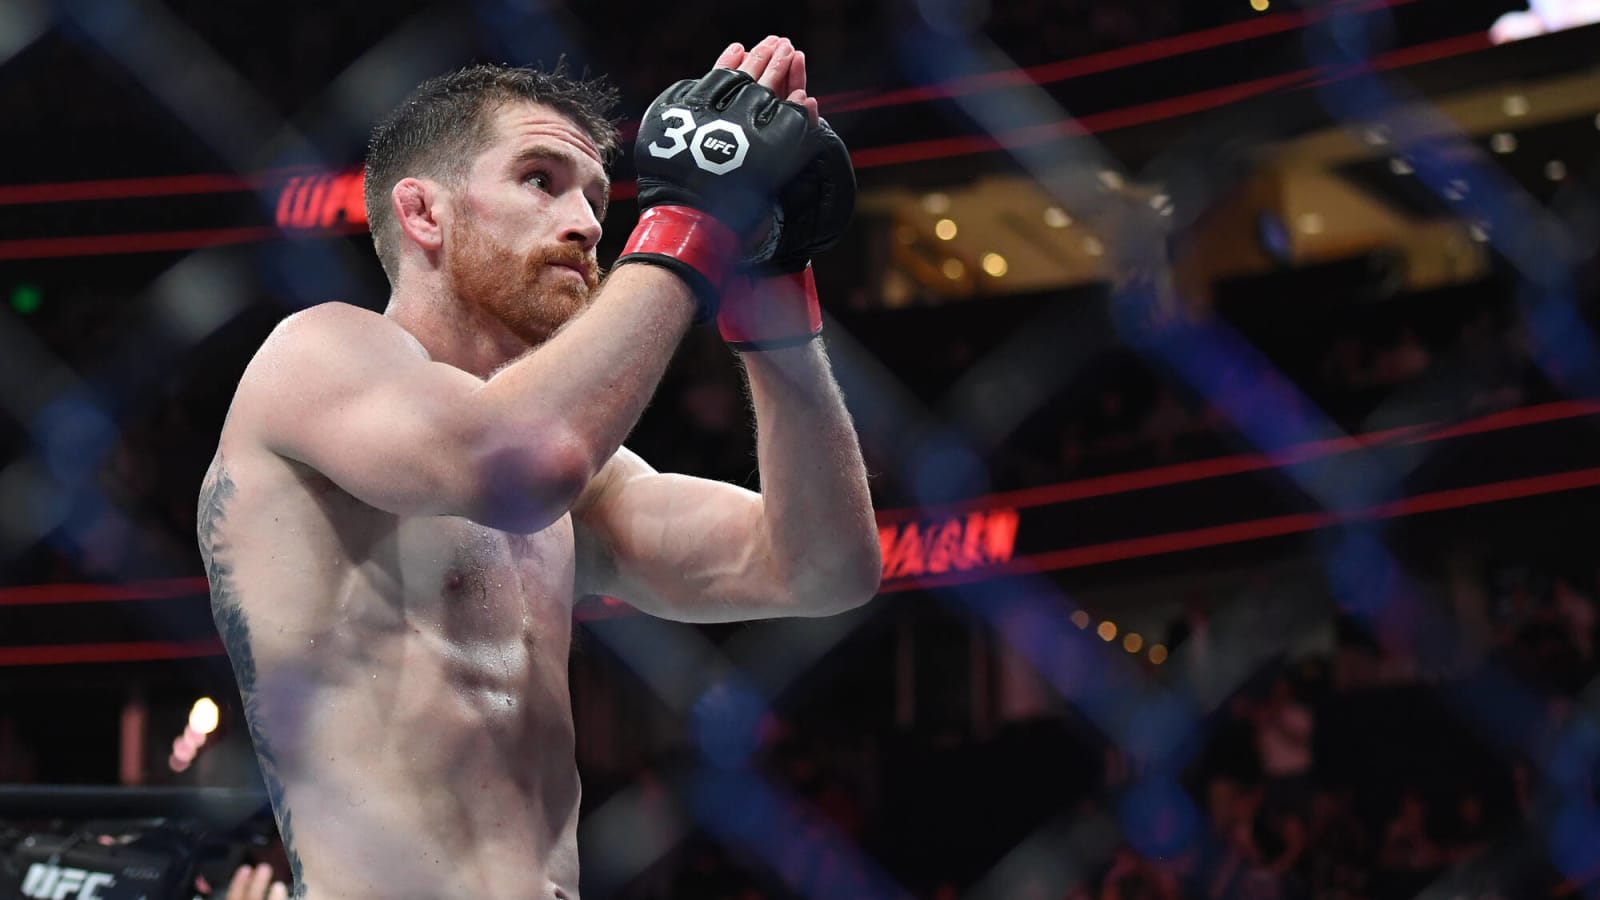 'Stare at you like a Lion!' Cory Sandhagen finds similarities between the fighting style of Jose Aldo and Merab Dvalishvili